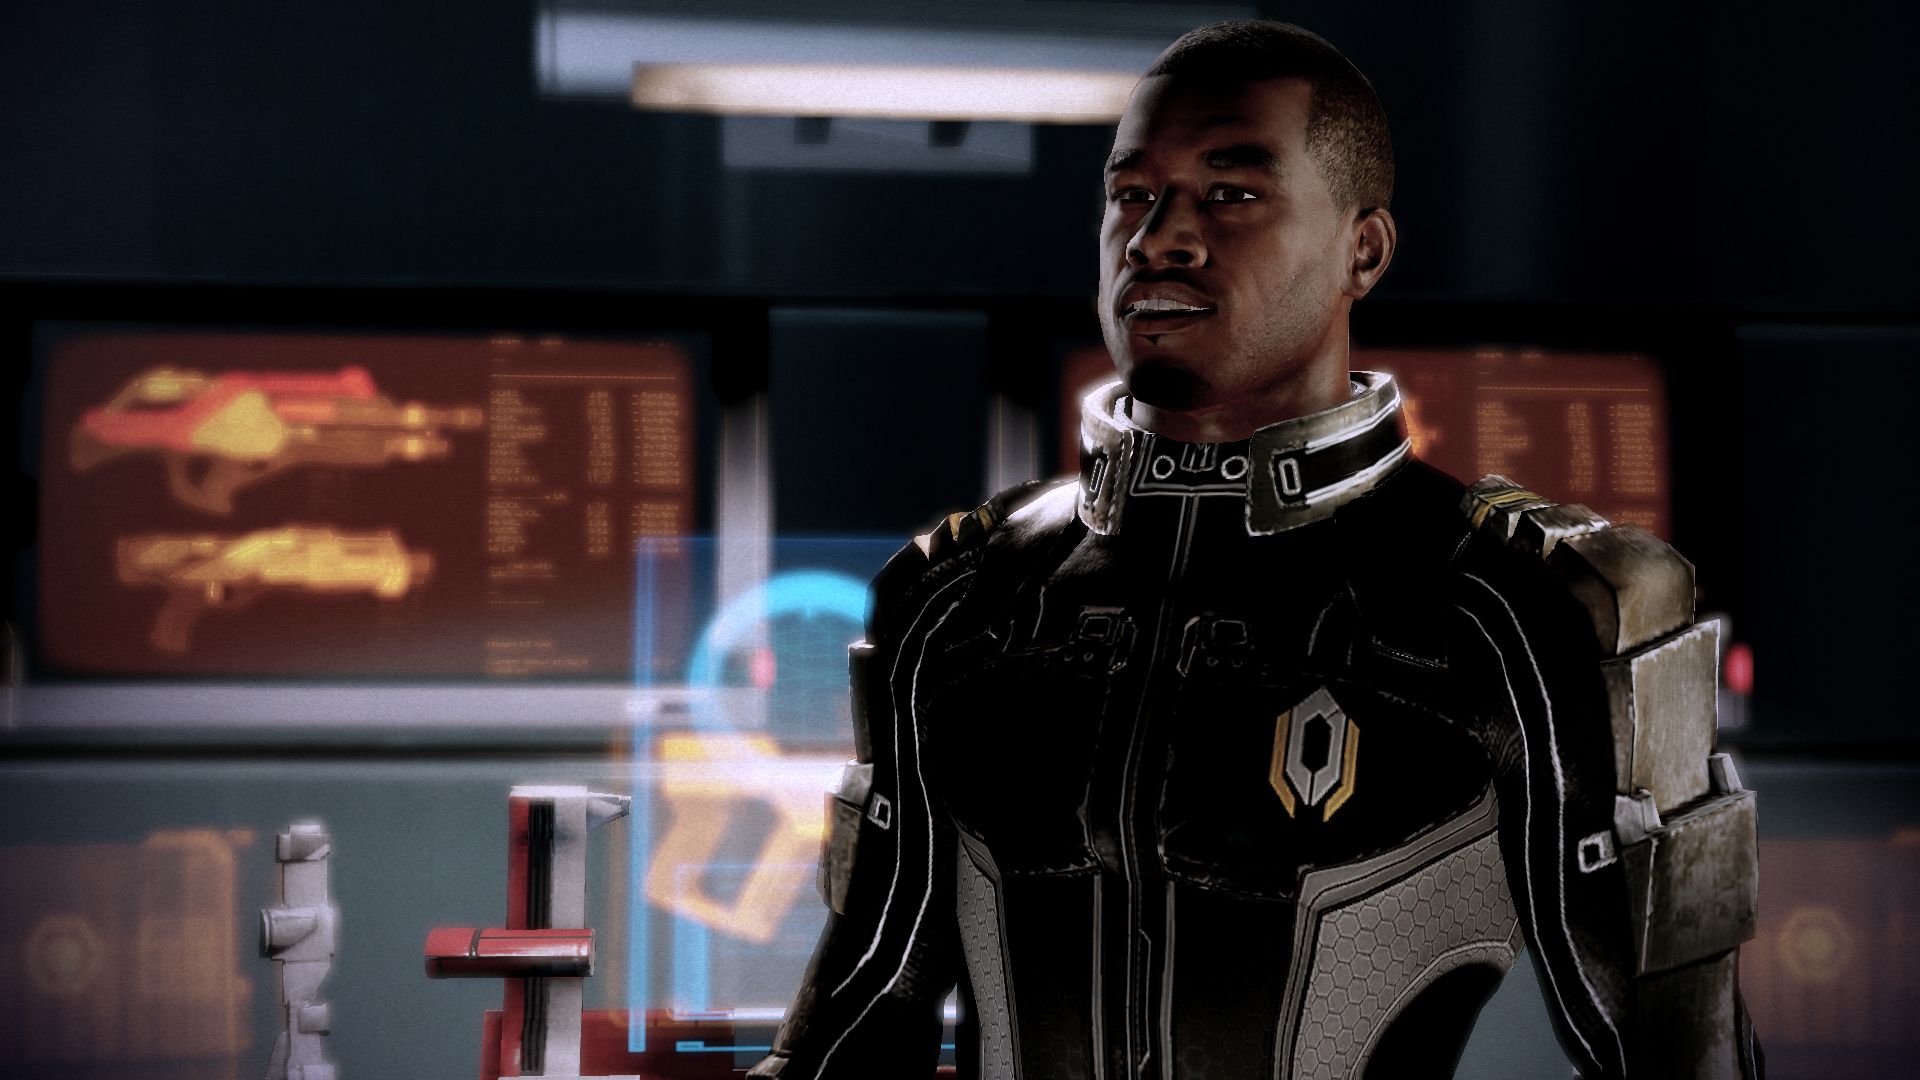 Jacob from Mass Effect 2